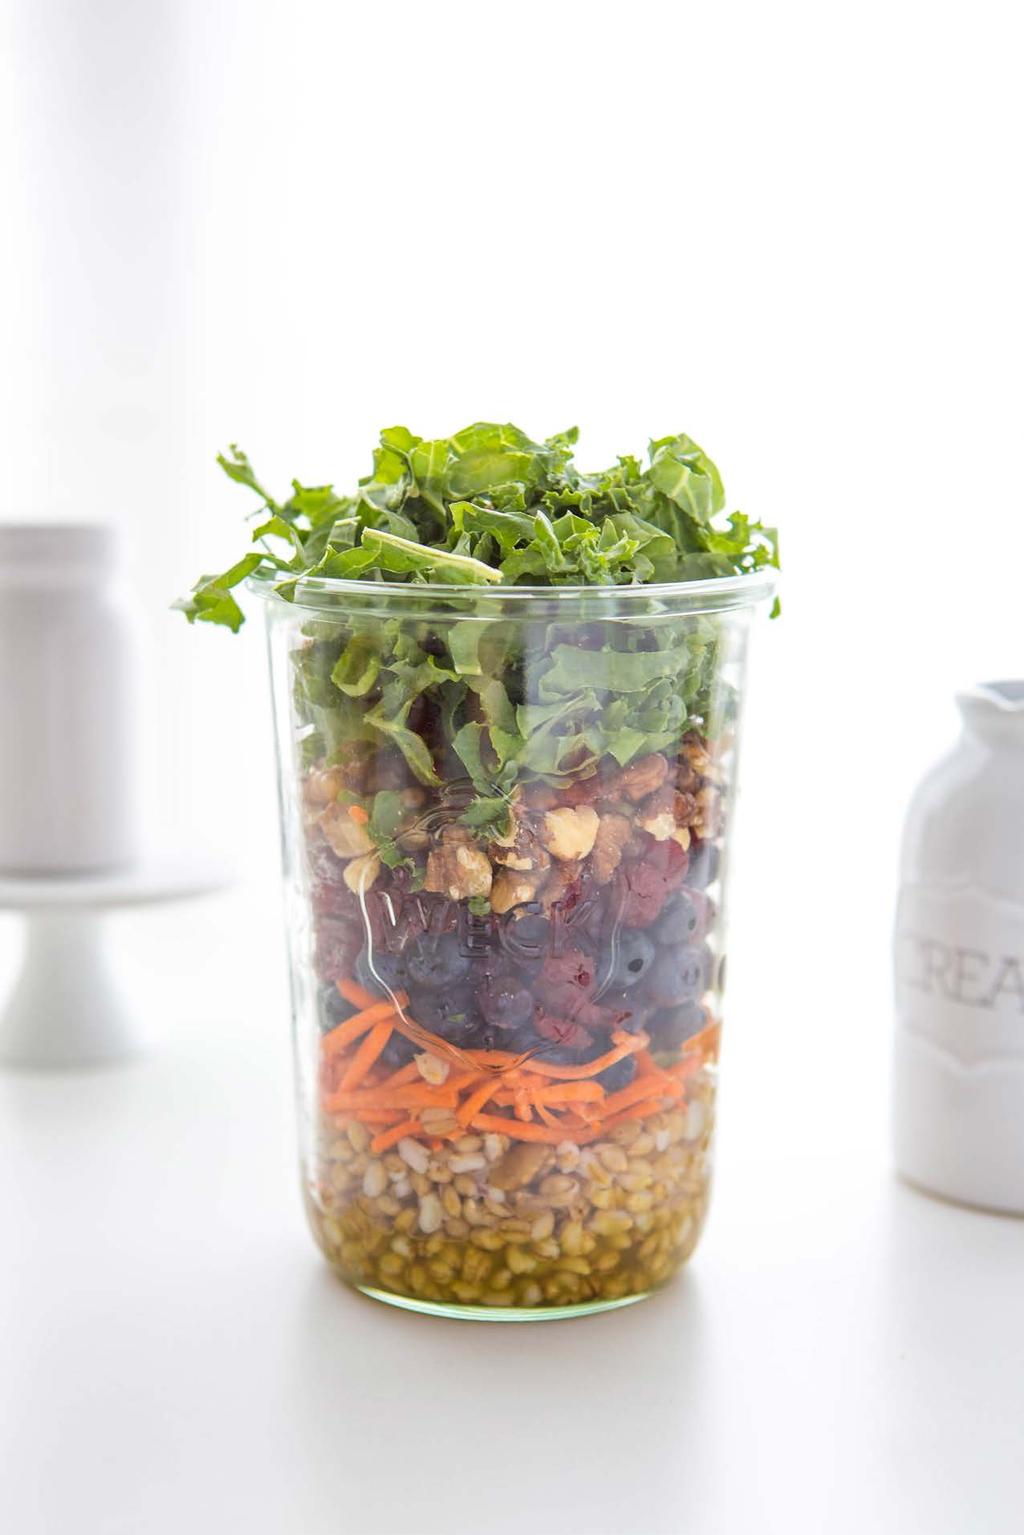 1. Superfood Shaker Quick and tasty, this salad brings together hearty grains, savory veggies and sweet dried fruits for a satisfying meal that you can tote on-the-go anywhere.